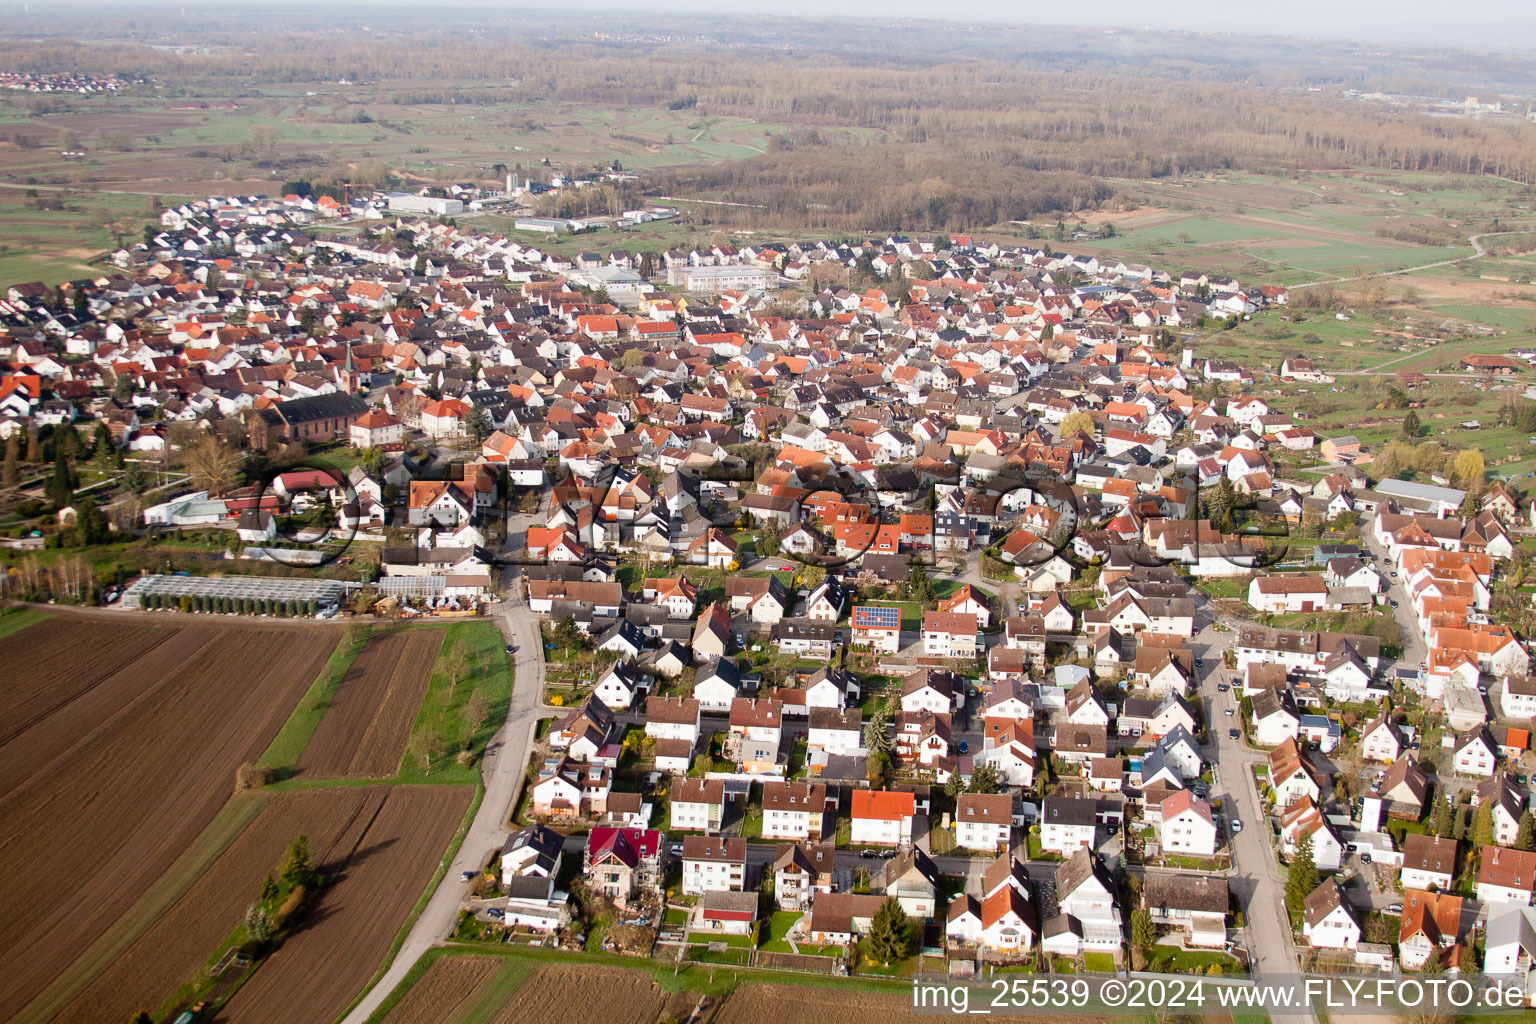 Town View of the streets and houses of the residential areas in the district Neuburgweier in Au am Rhein in the state Baden-Wurttemberg